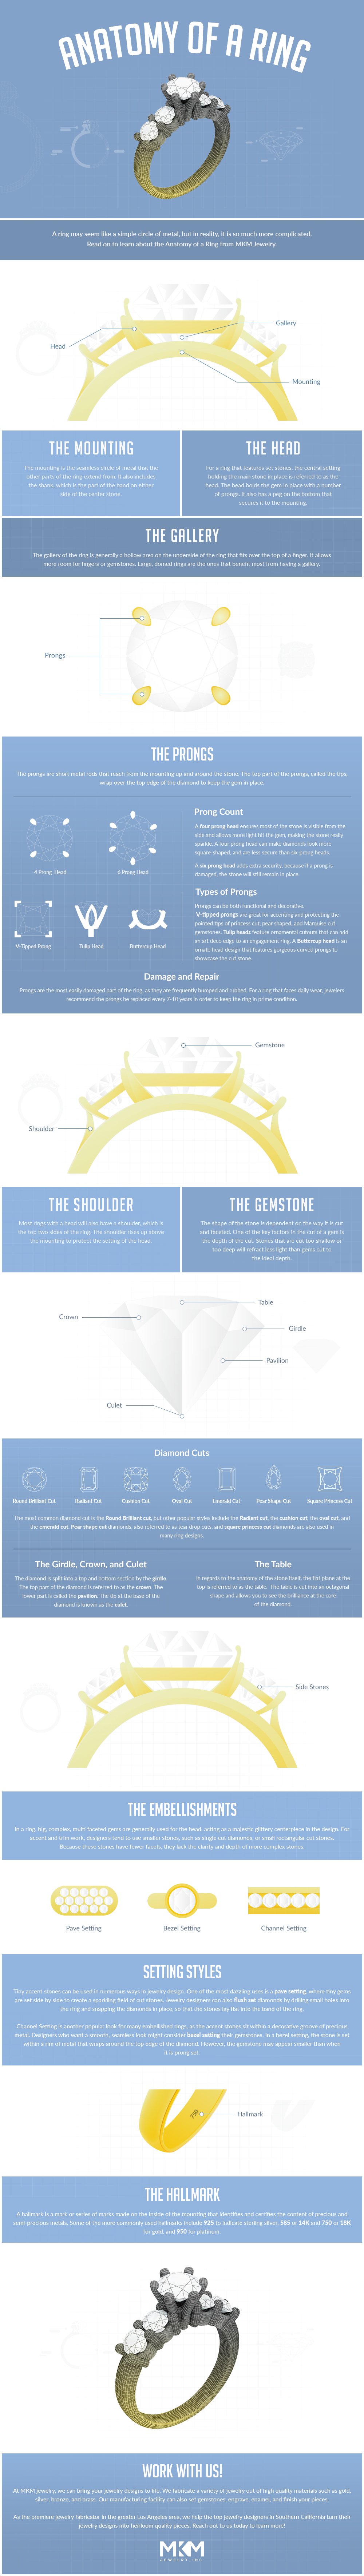 Anatomy of a Ring Jewelry Infographic